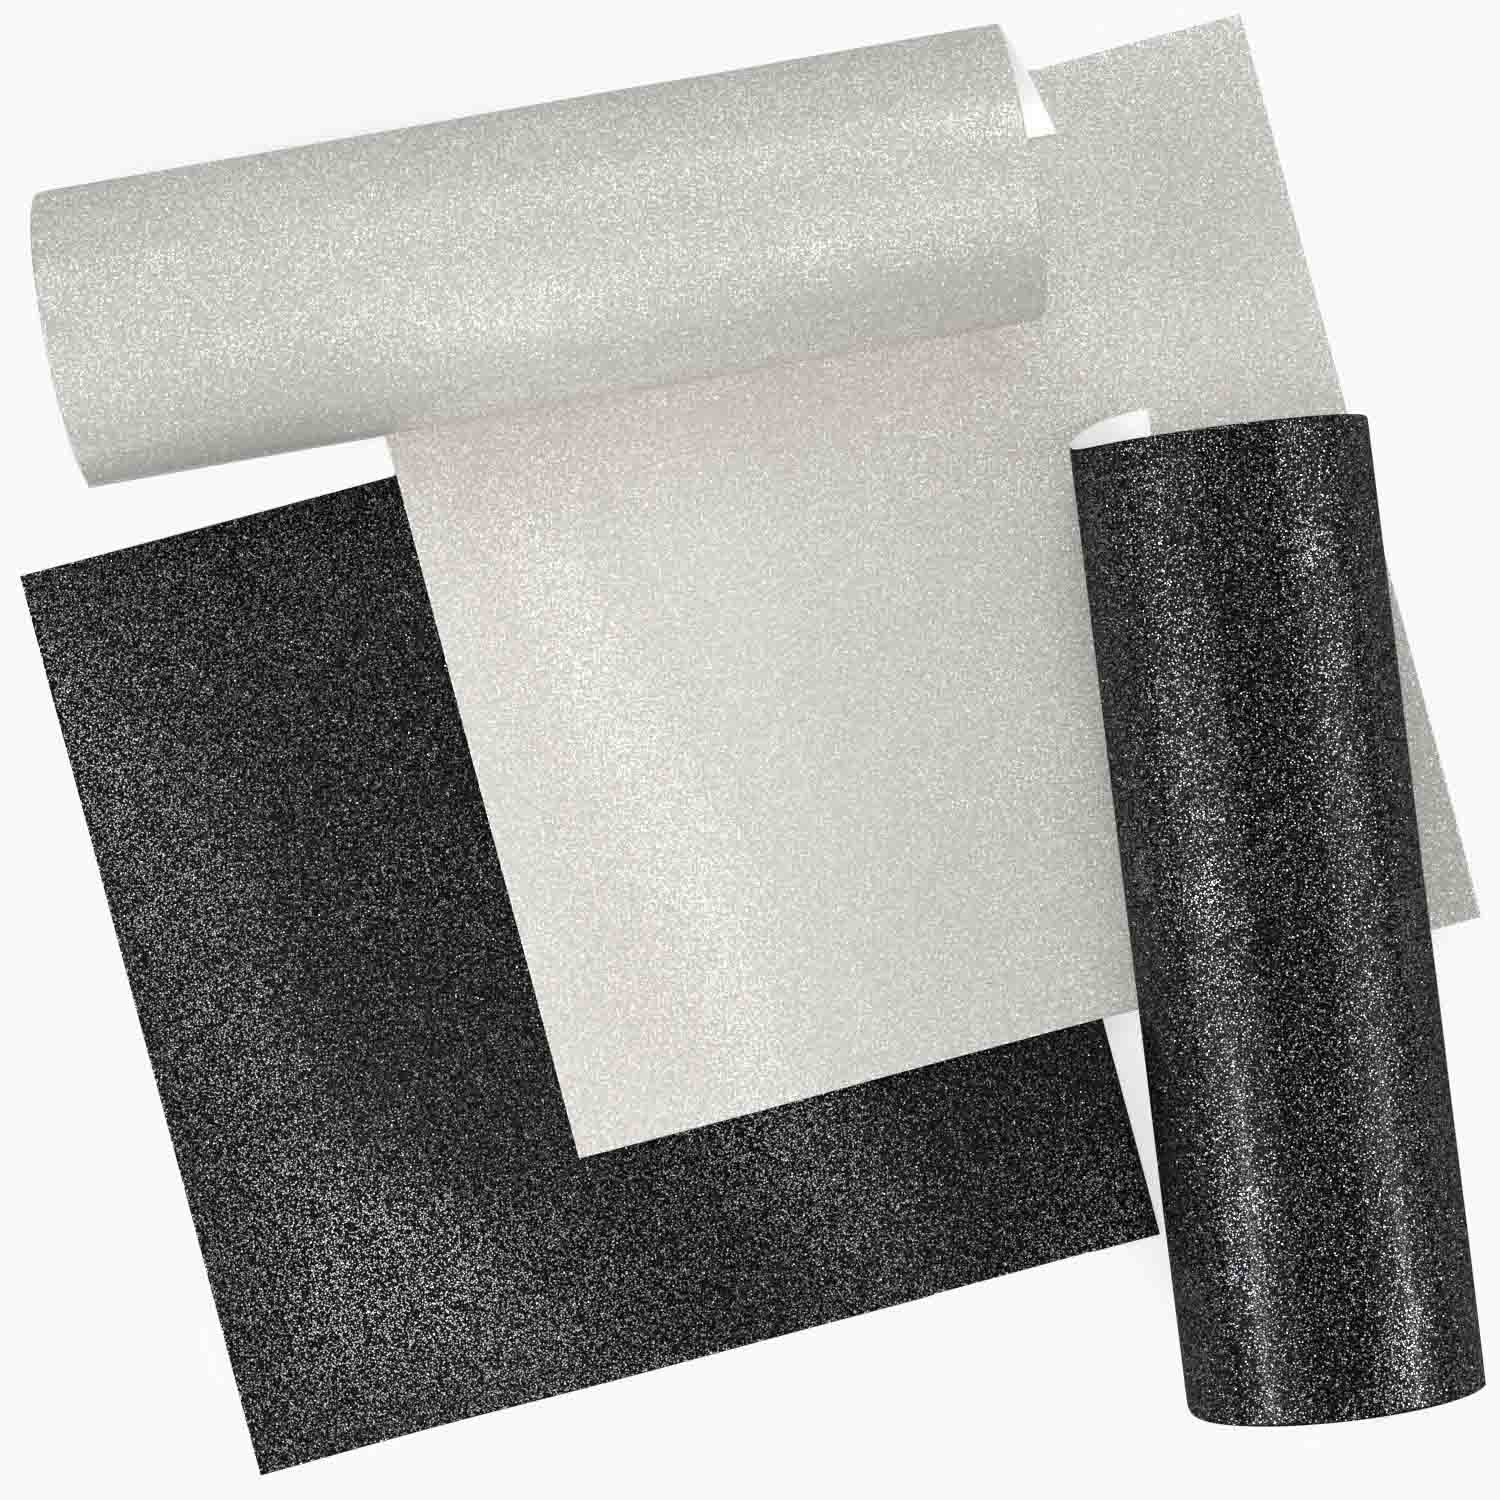 Et Cetera Papers Glitter Paper 12X12 - 10 PACK - Pale Yellow